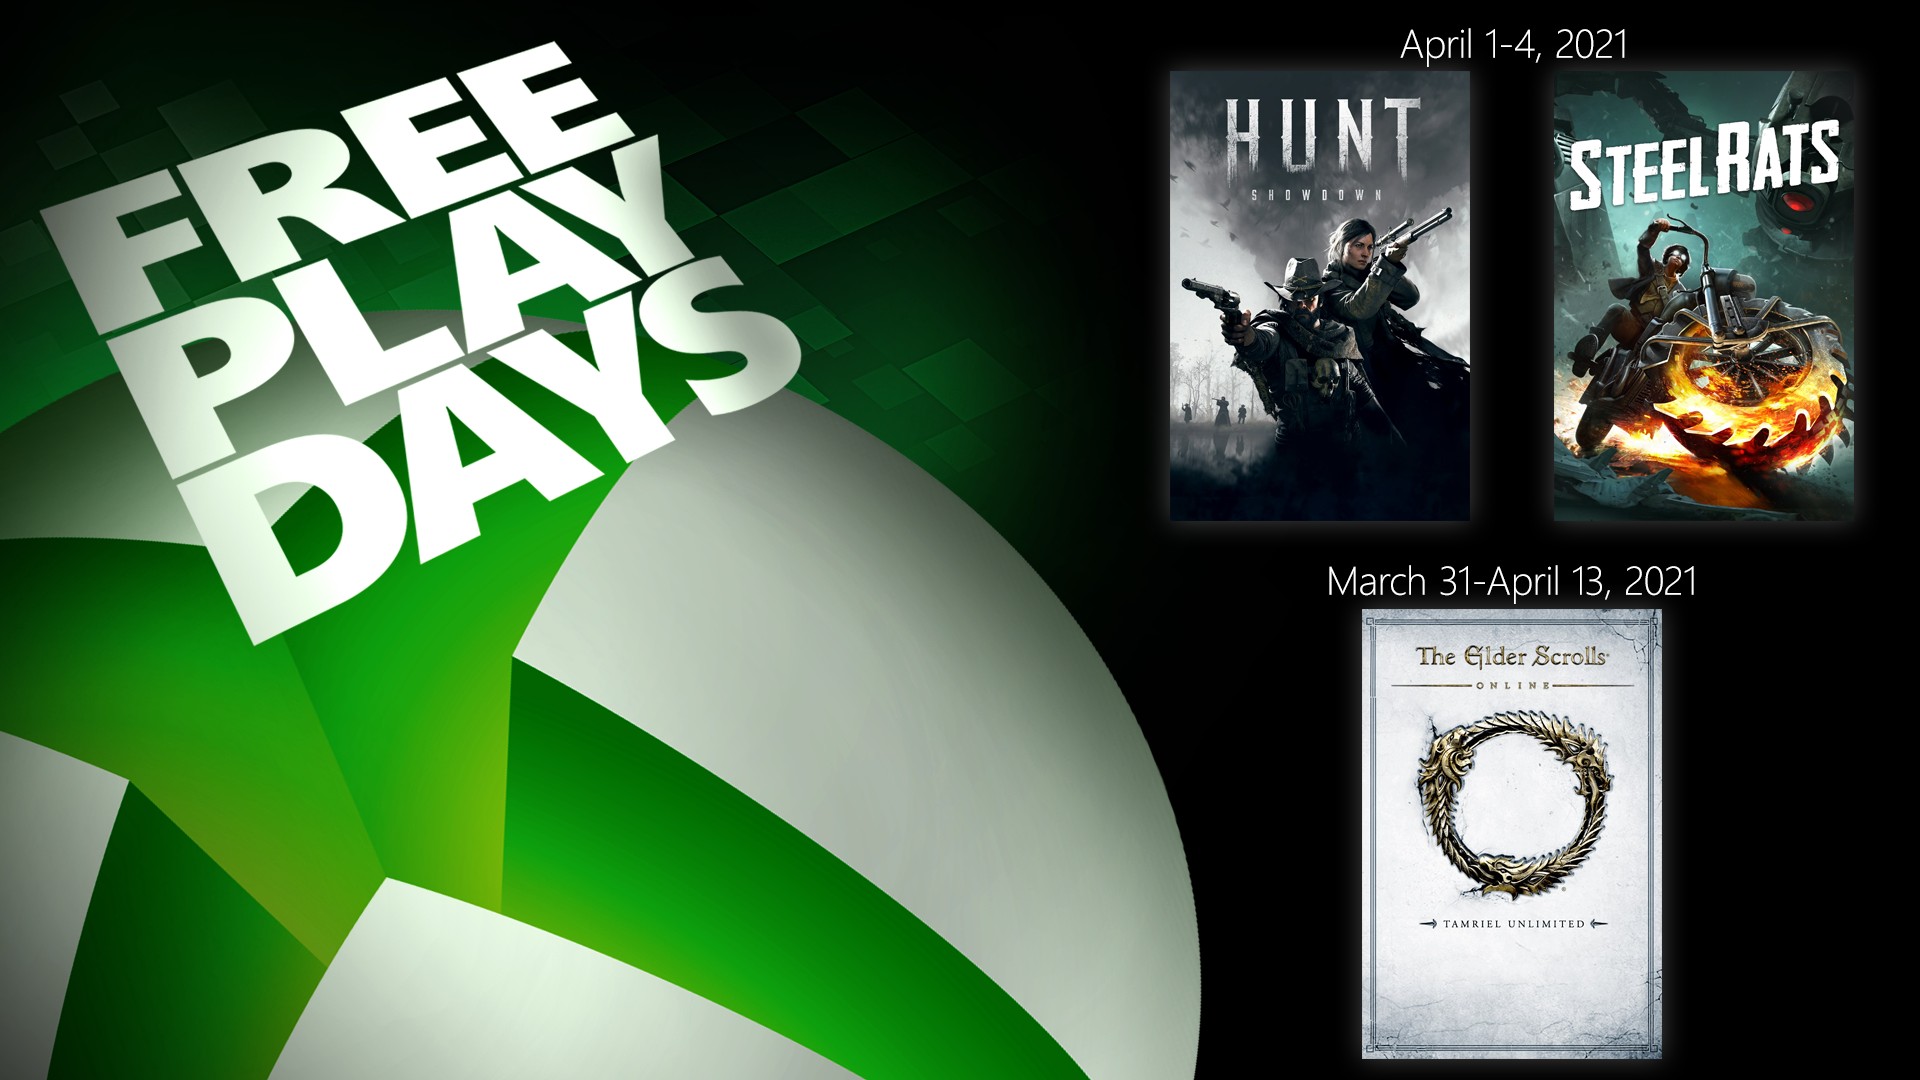 Free Play Days The Elder Scrolls Online Tamriel Unlimited Hunt Showdown And Steel Rats Best Curated Esports And Gaming News For Southeast Asia And Beyond At Your Fingertips - freeplay assassin game roblox